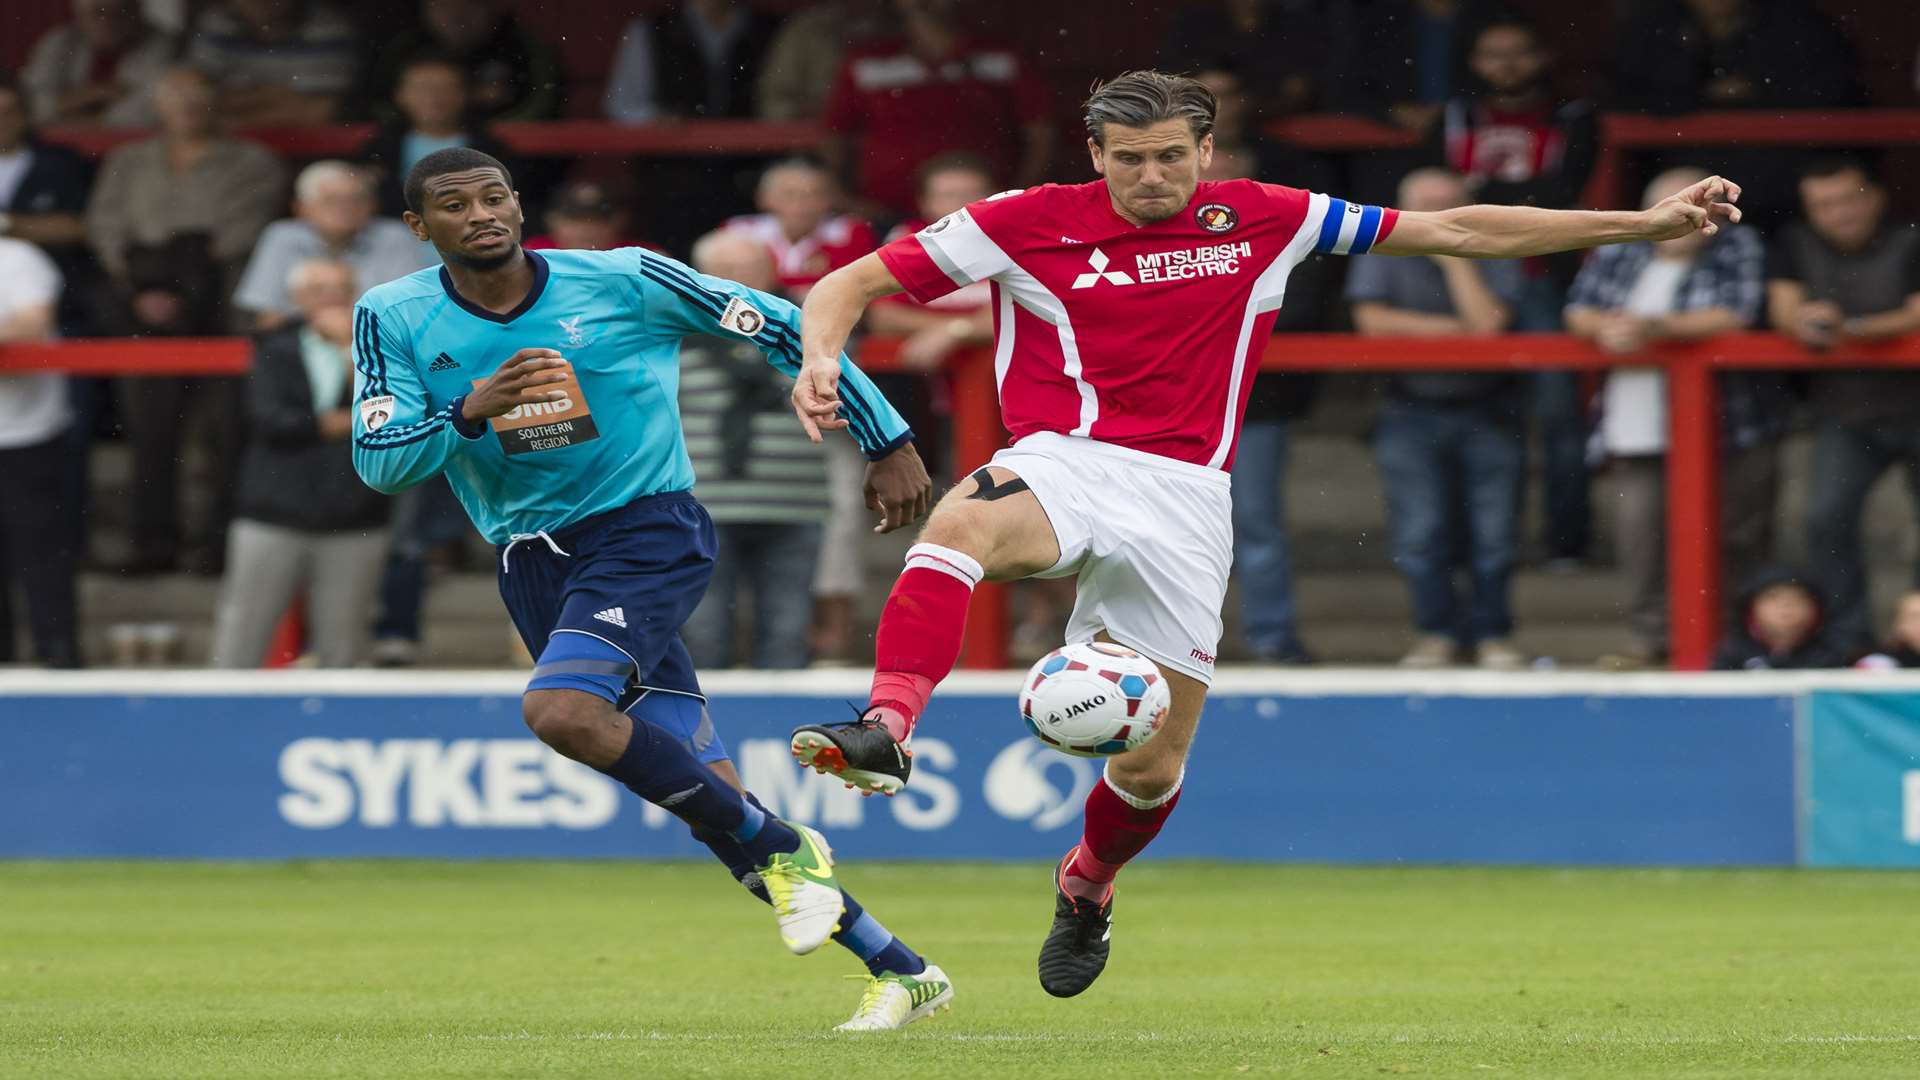 Ebbsfleet captain Tom Bonner gets to the ball ahead of Danny Mills Picture: Andy Payton